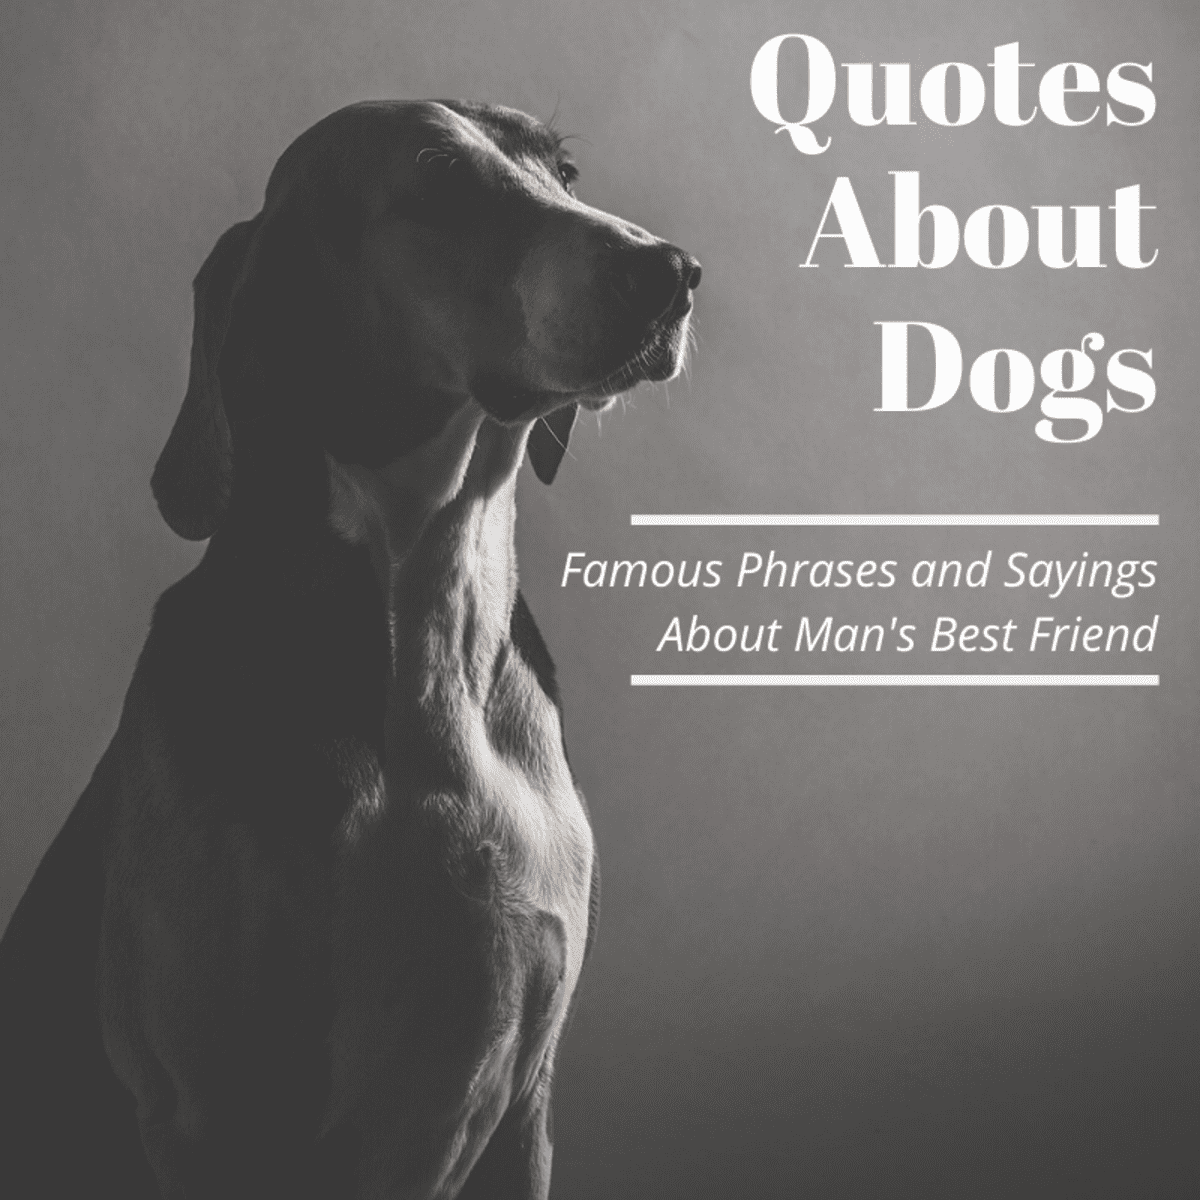 Famous Quotes About Dogs - Holidappy